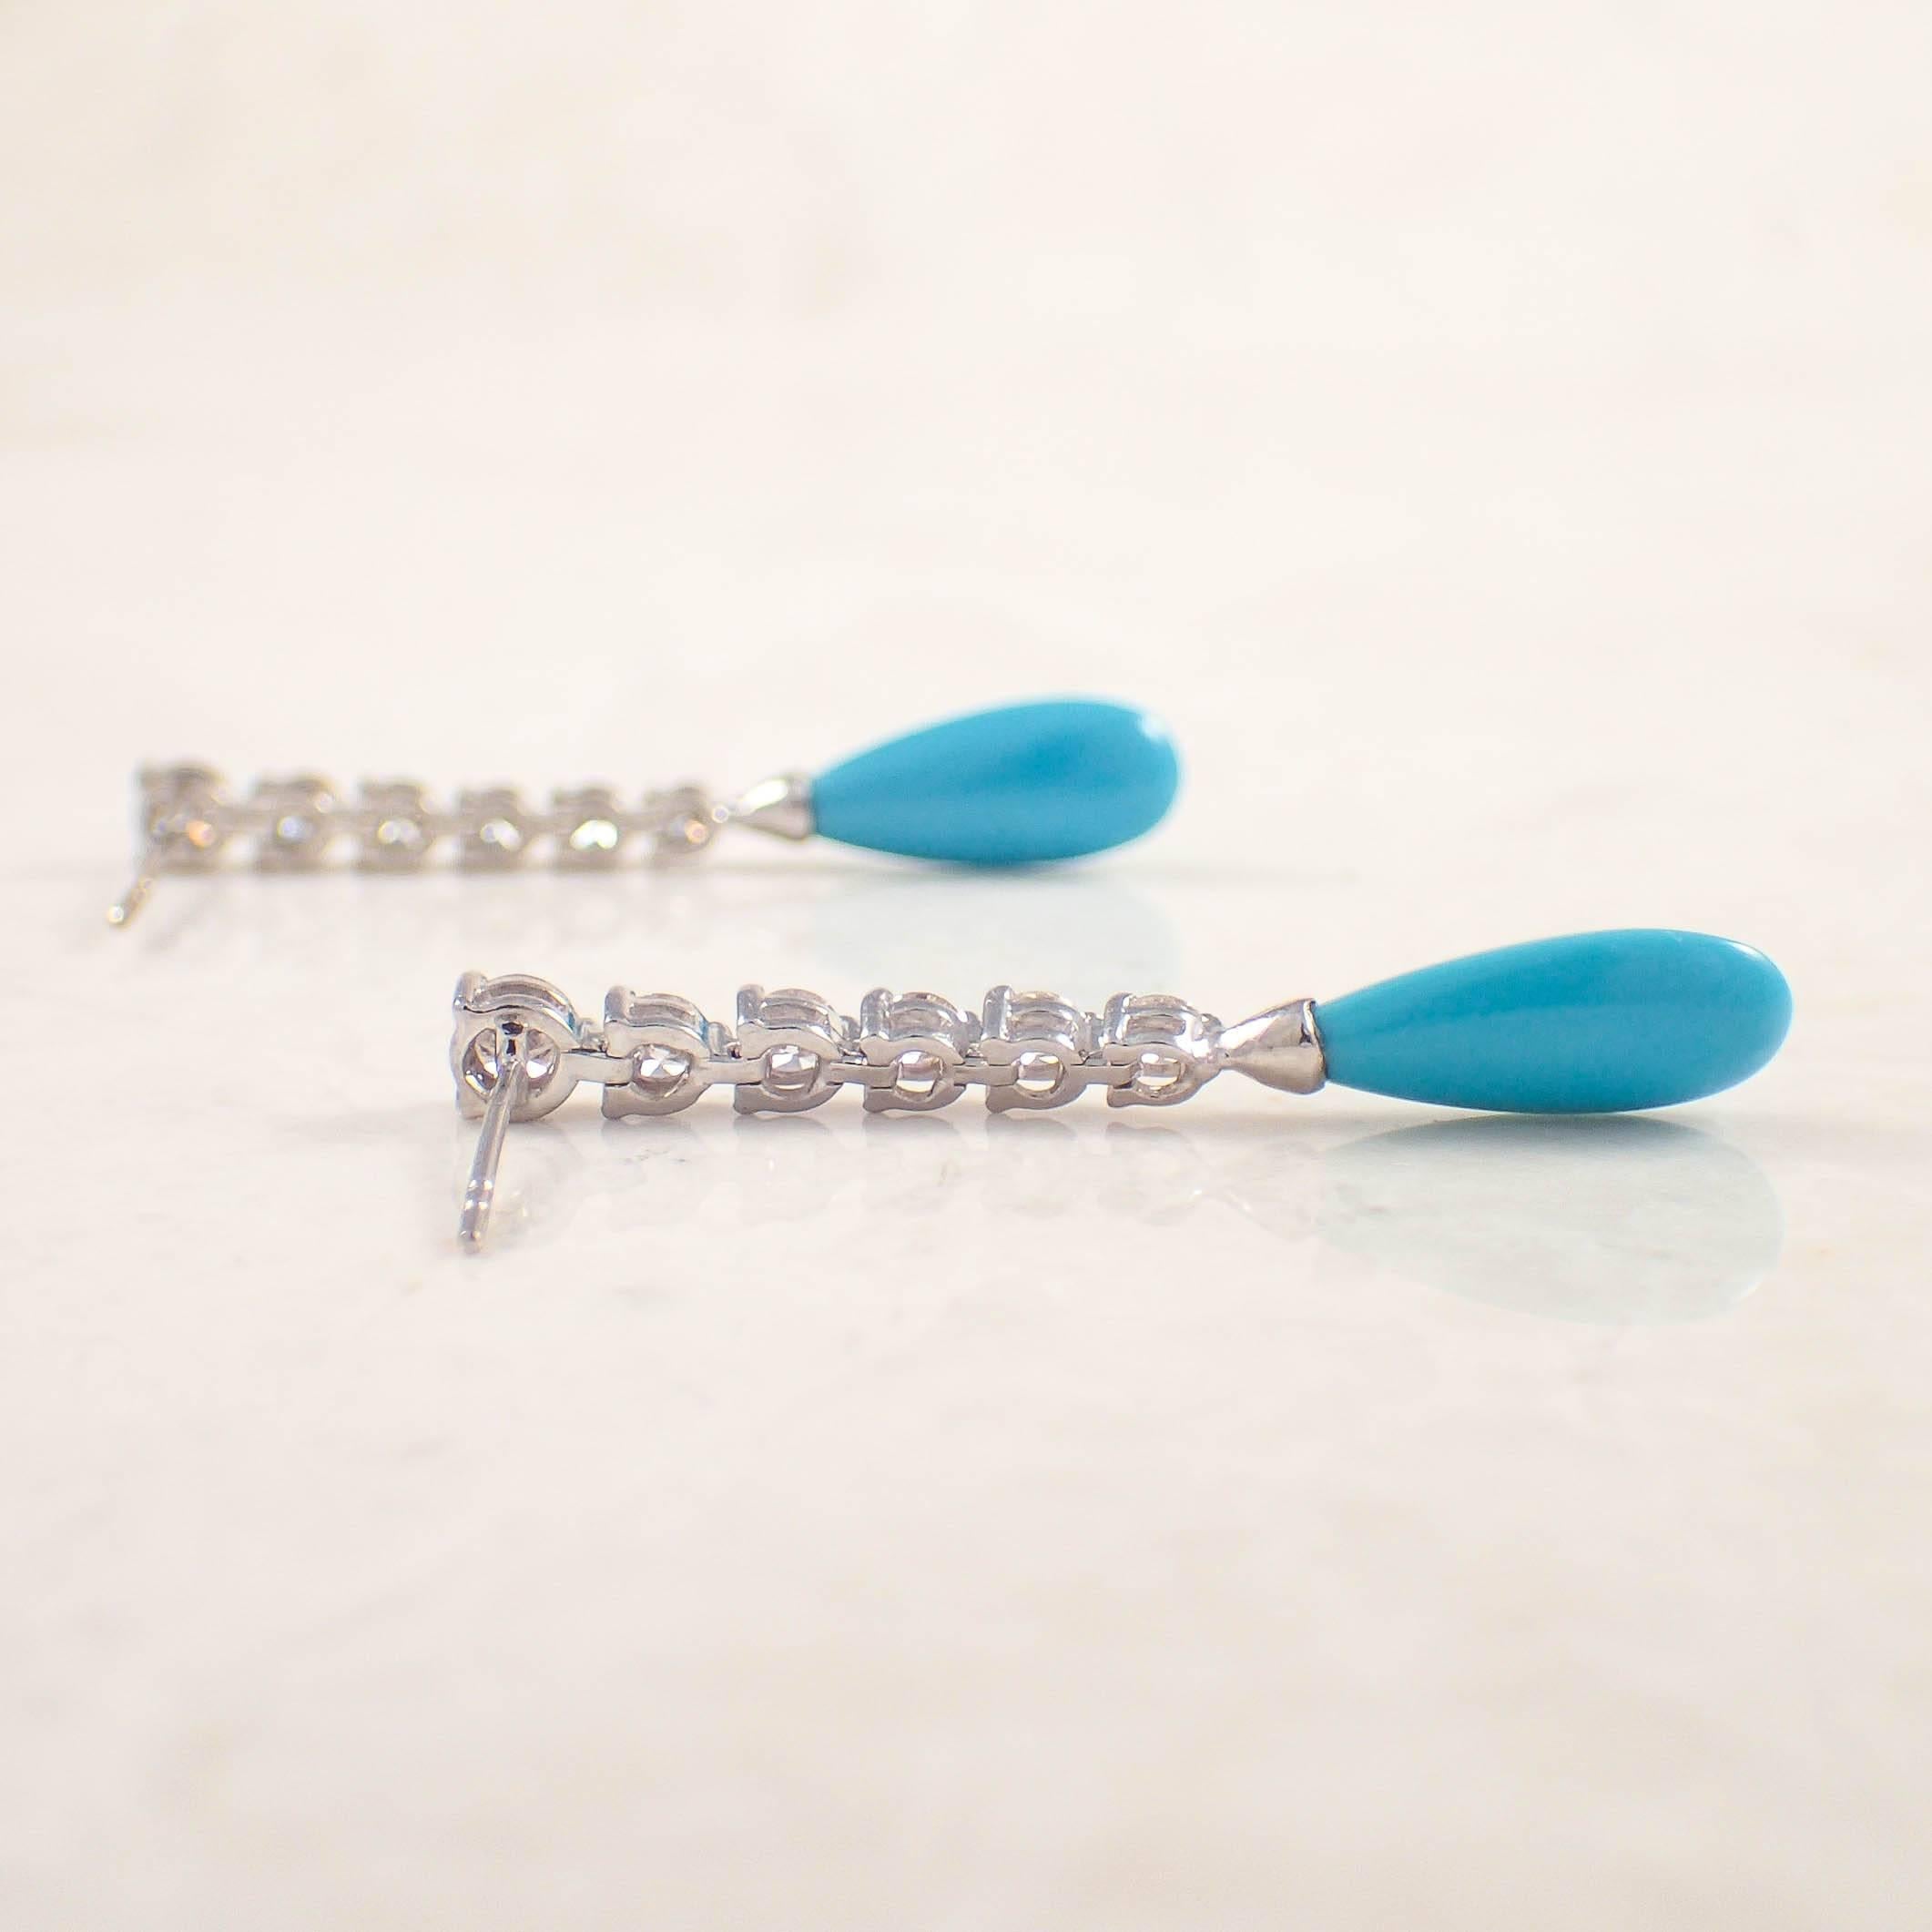 18K White gold diamond and turquoise pendant earrings. The flexible earrings are set with 2 tear drop turquoises suspended by 12 graduated diamonds weighing approximately .85 carat total. The earrings measure 1 1/2 inches long and weigh 3.5